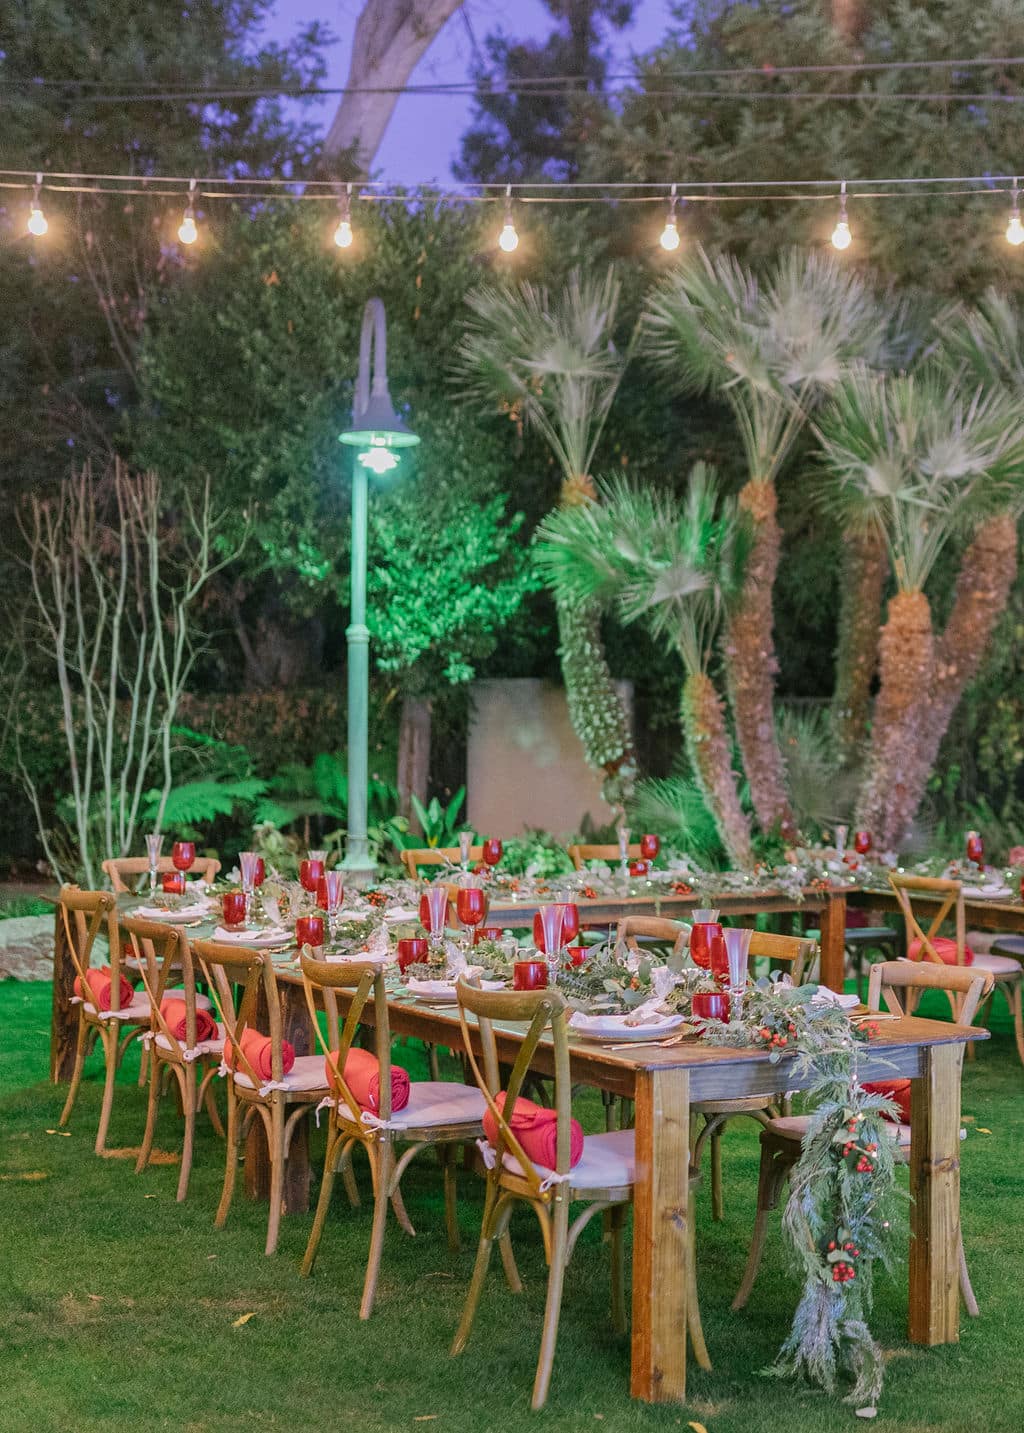 6 Ways to Celebrate A Christmas Wedding or Party